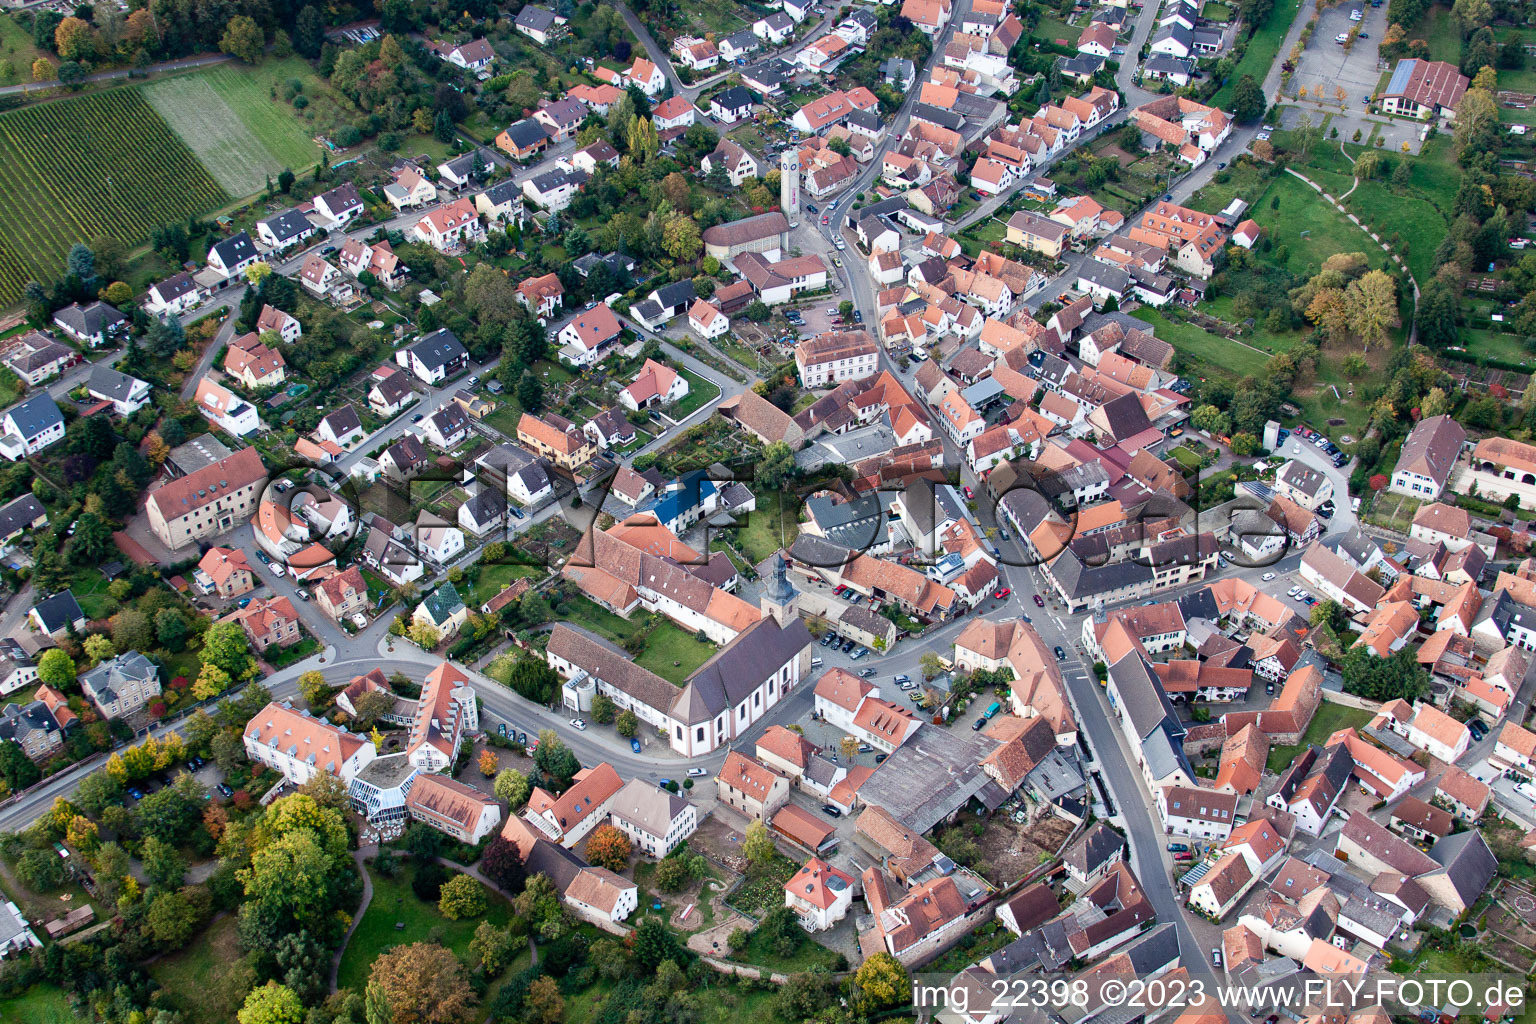 Klingenmünster in the state Rhineland-Palatinate, Germany seen from a drone